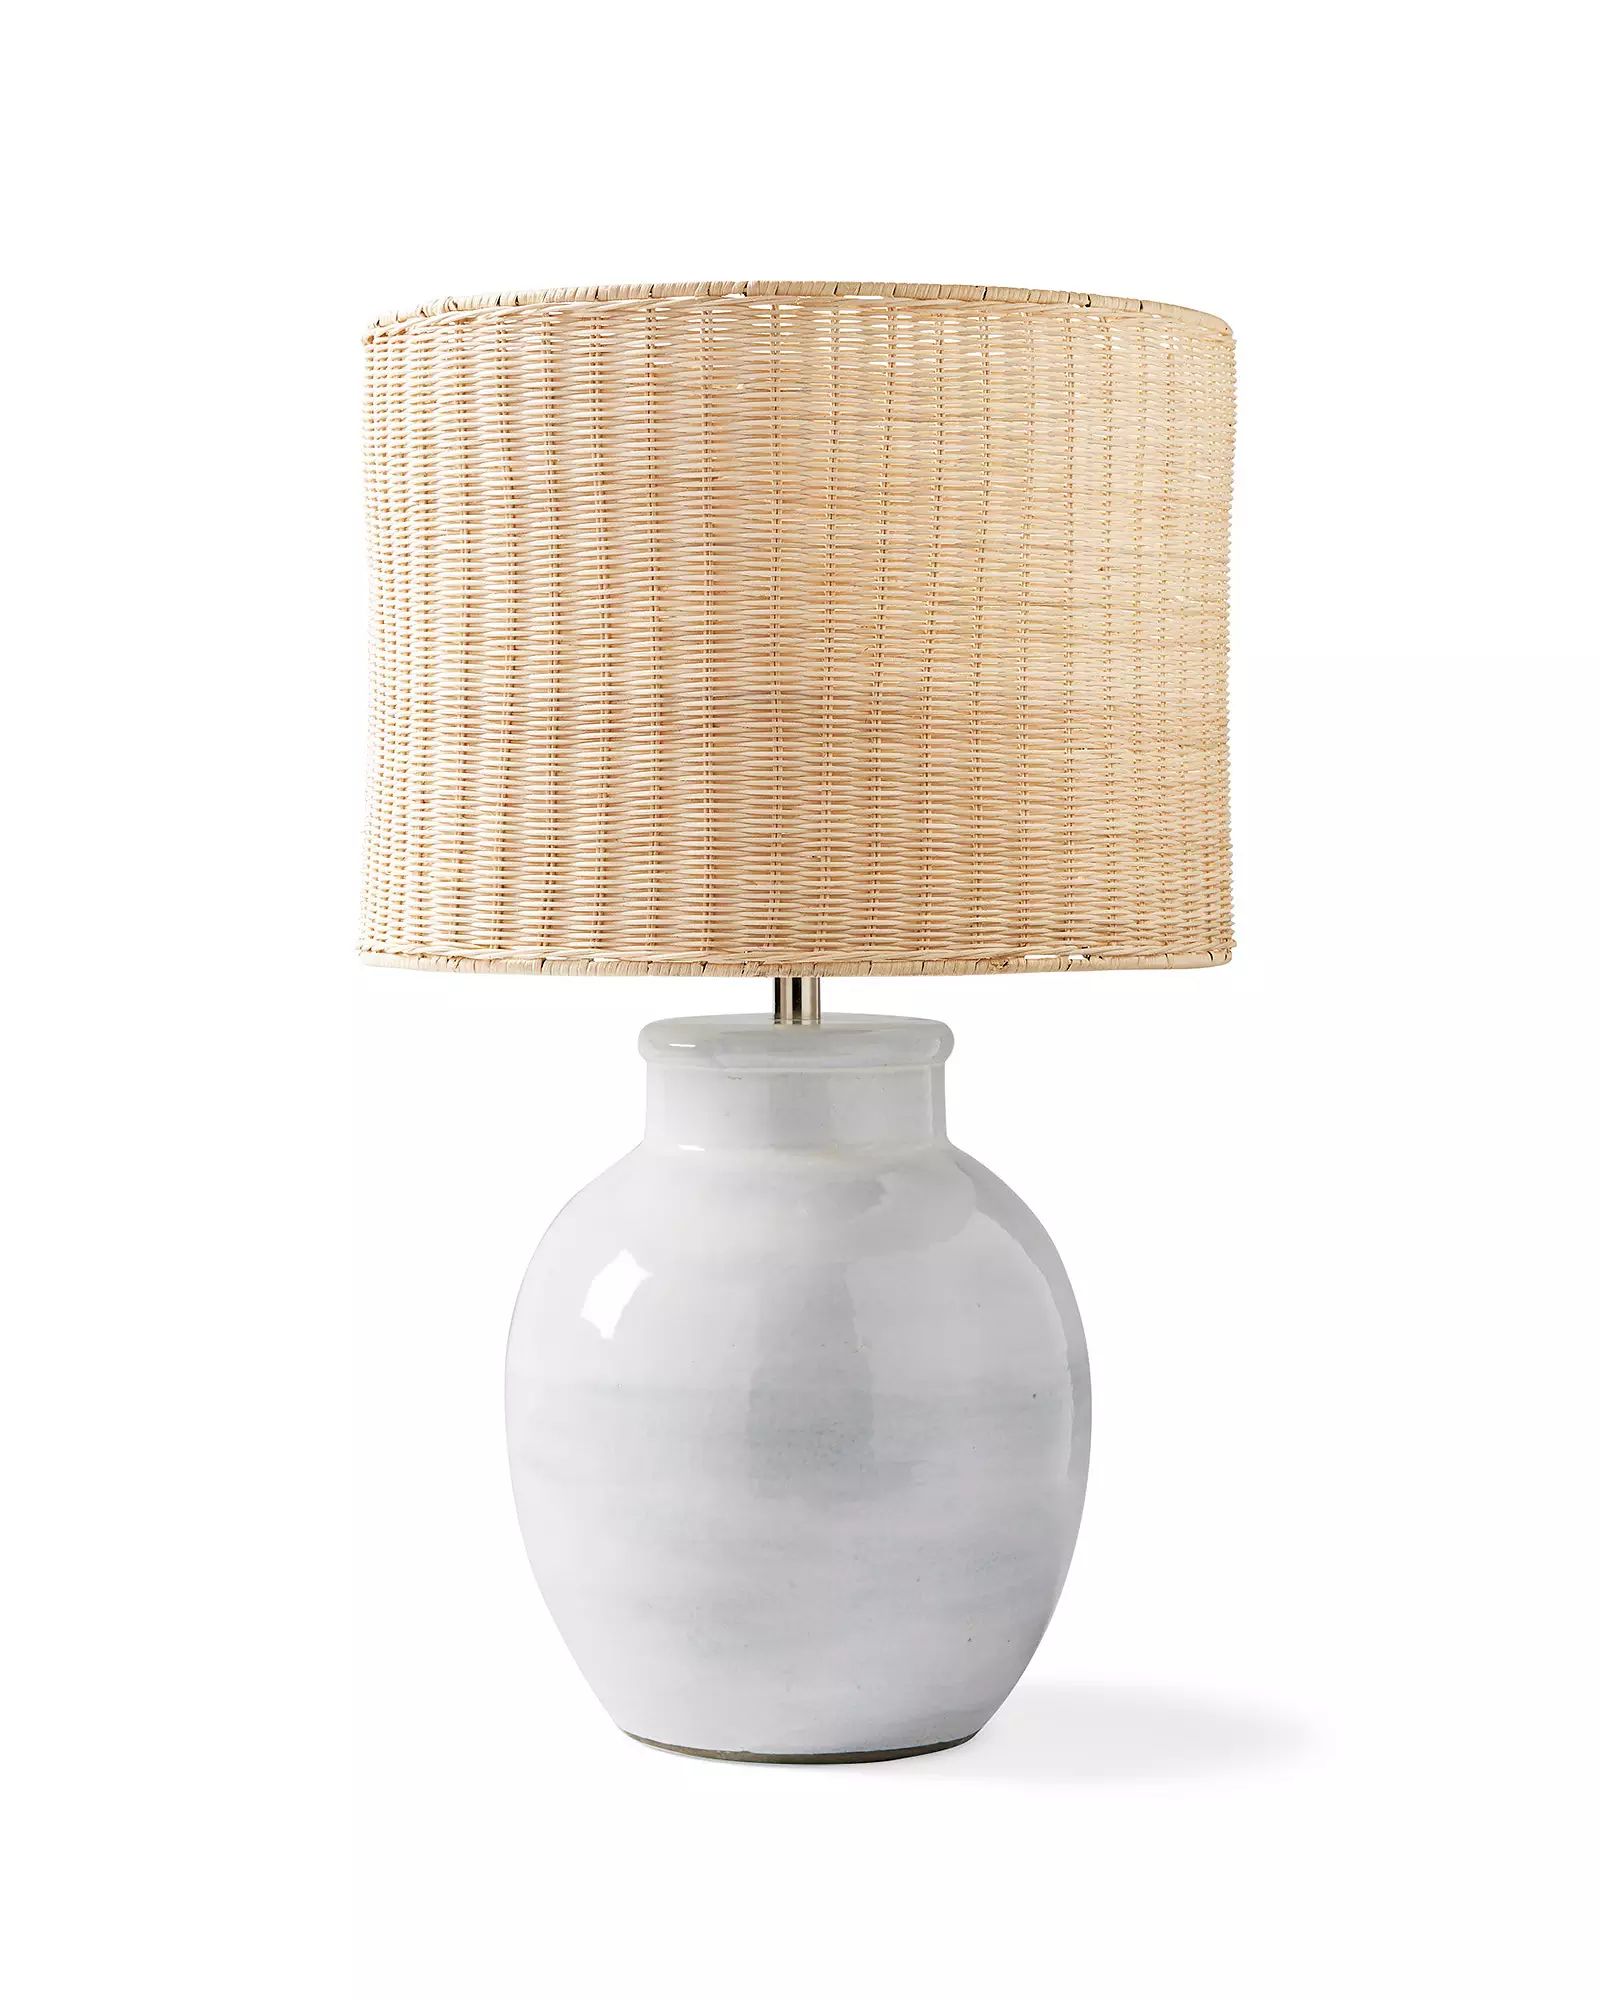 Morris Table Lamp - Wicker | Serena and Lily